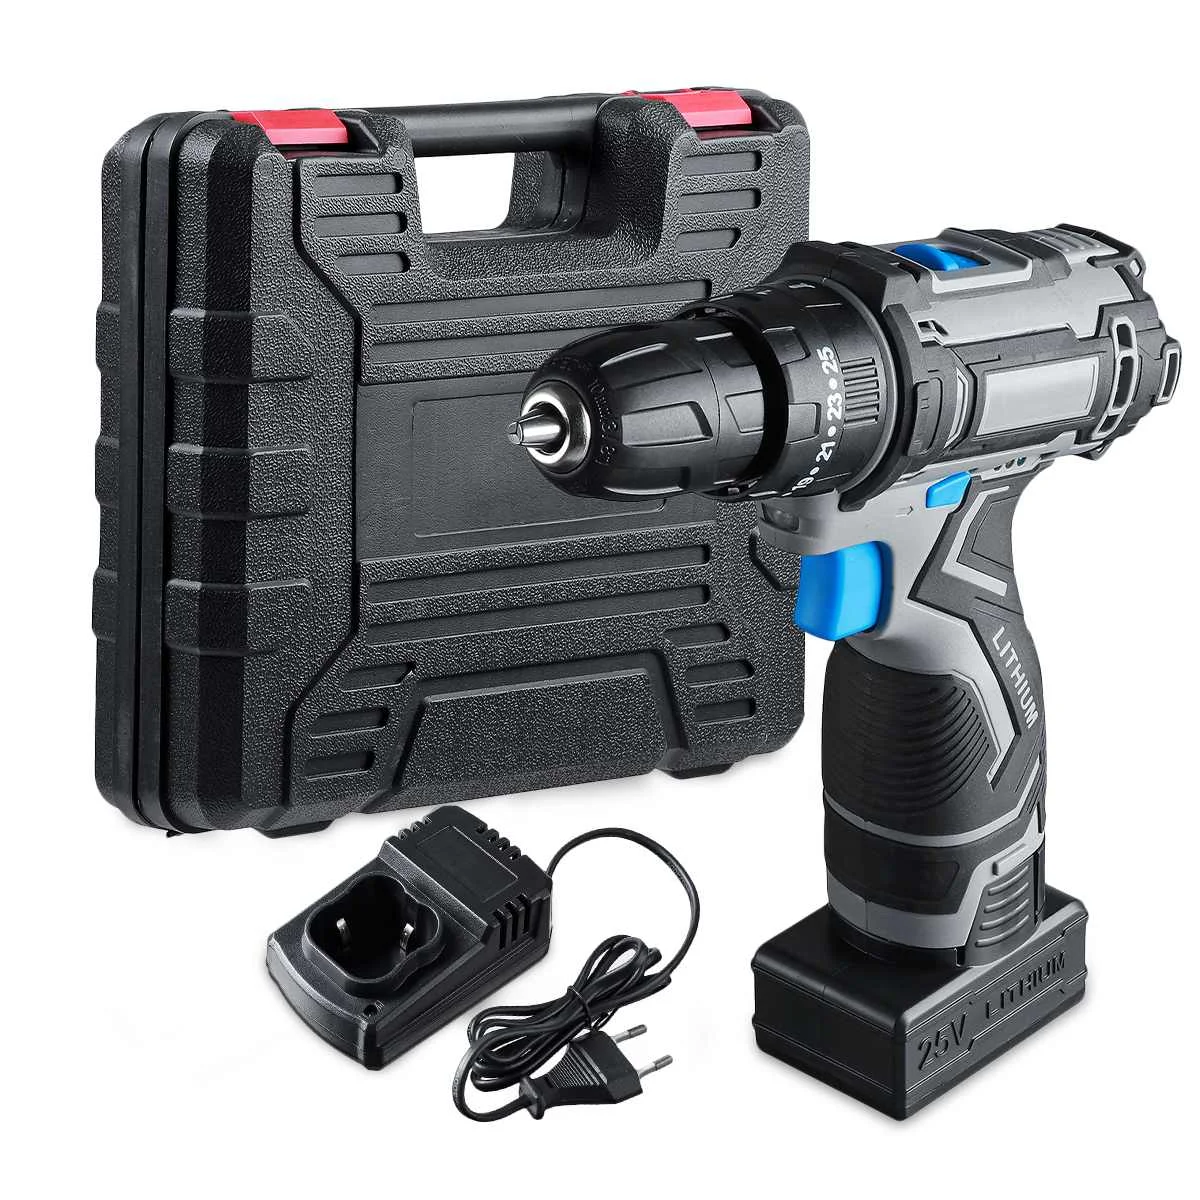 

25V Cordless Electric Drill Electric Screwdriver 3/8-Inch 2-Speed Powerful Tool Screwdriver Drill with Battery & Adapter Box